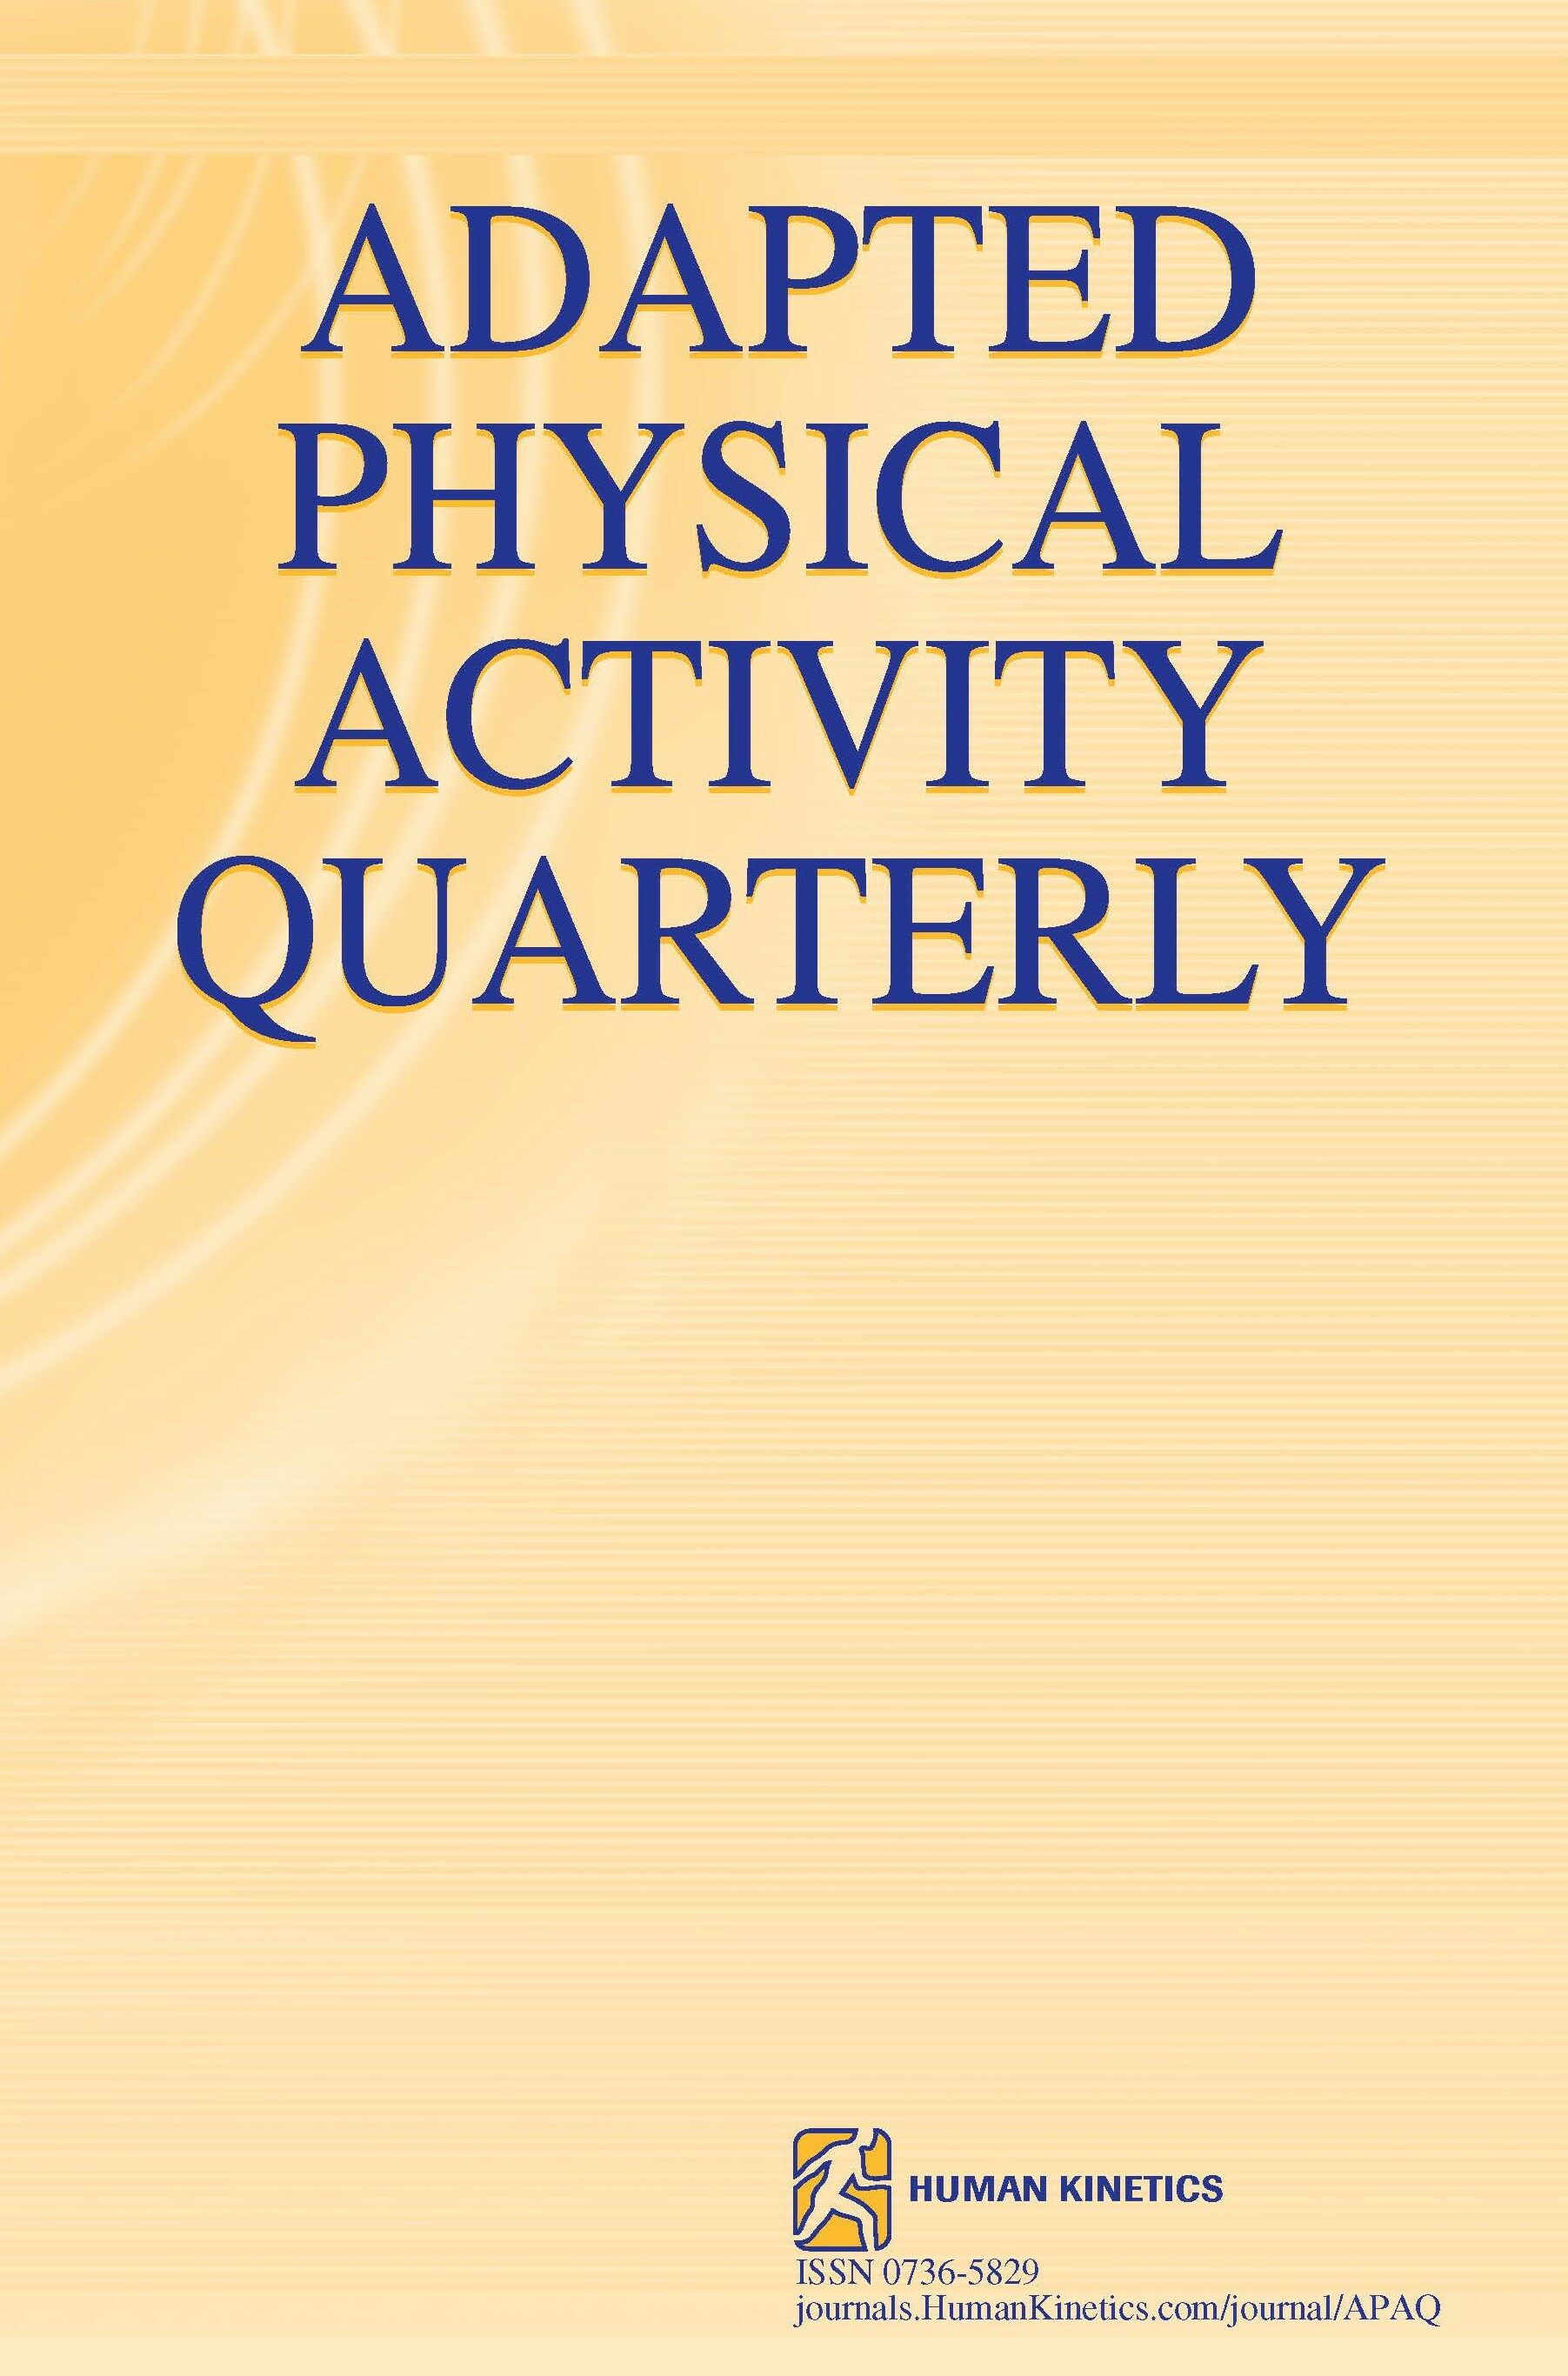 Adapted Physical Activity Across the Life Span